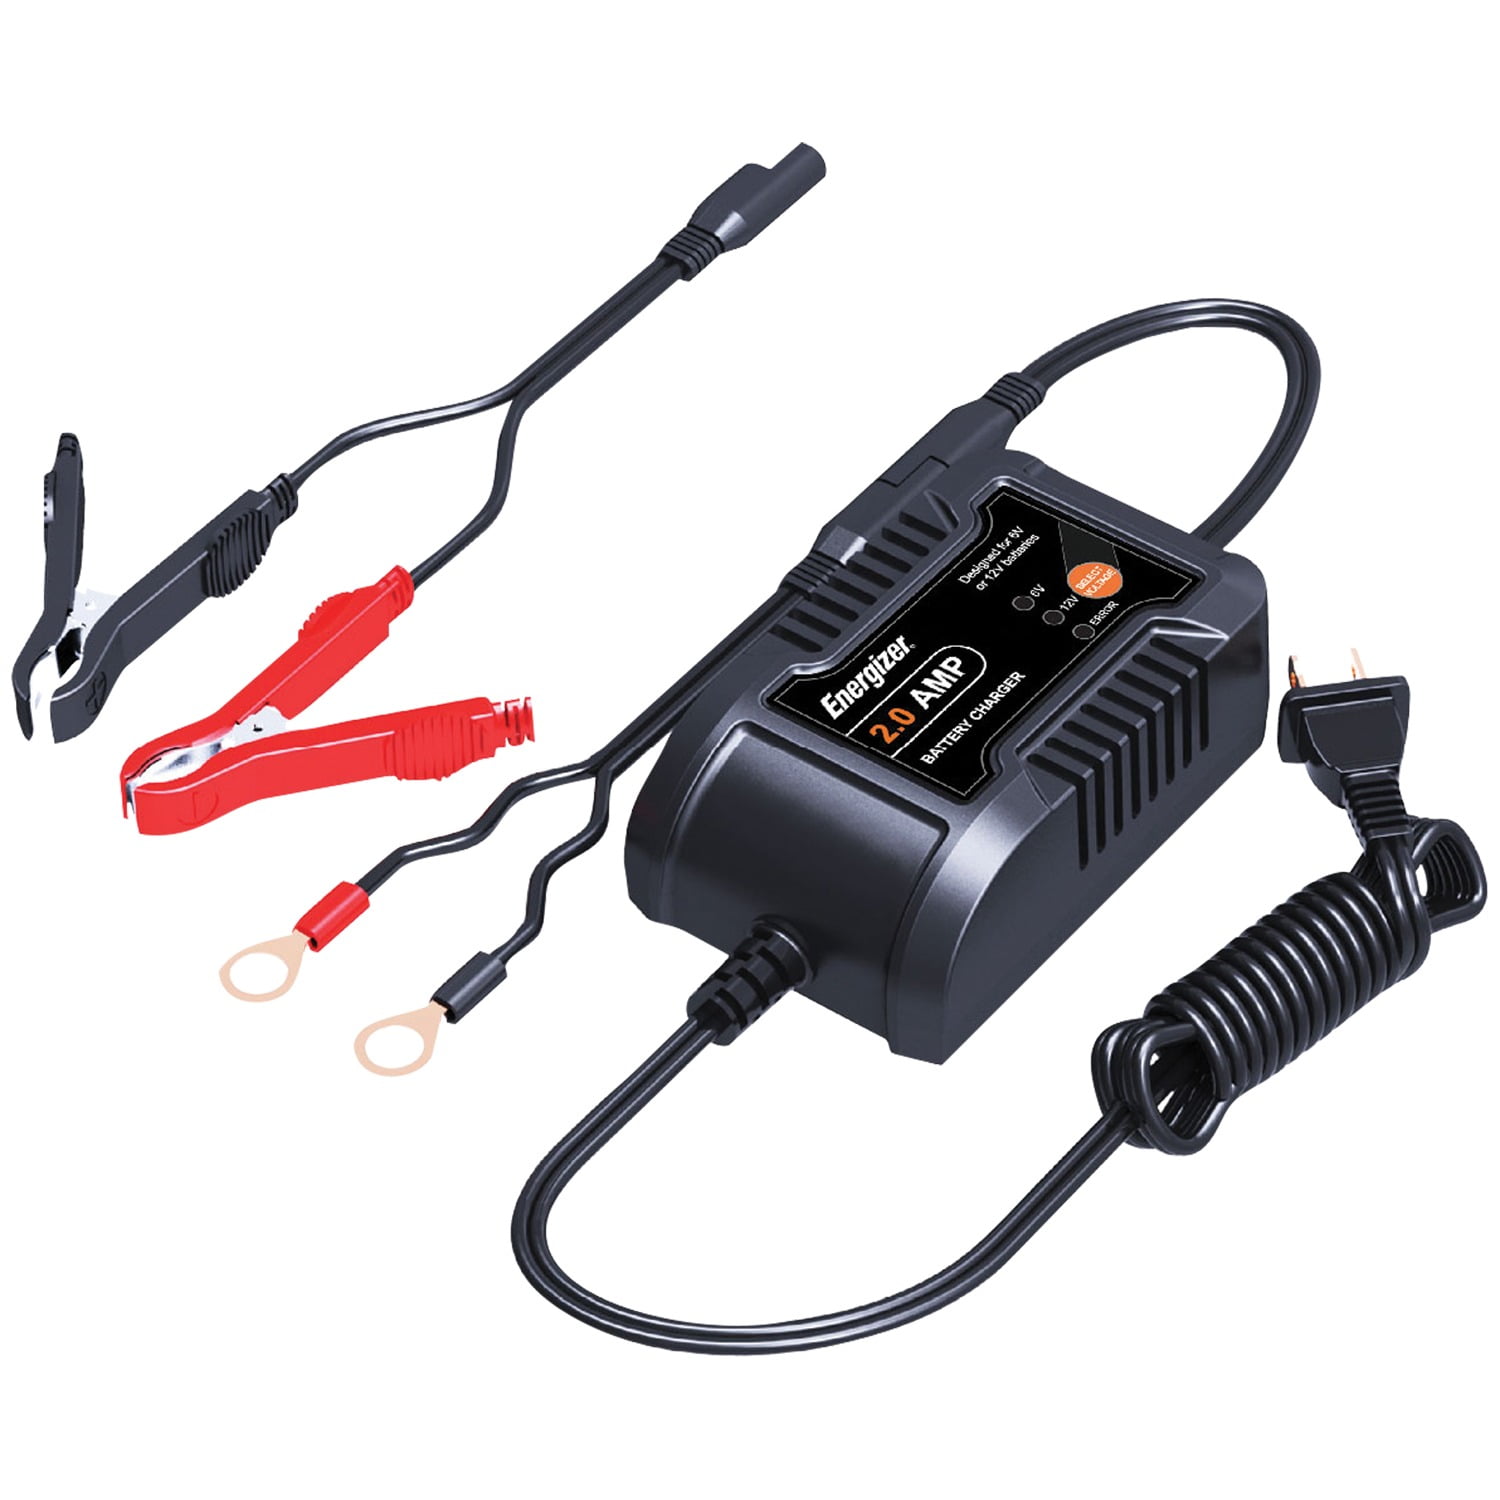 2 amp battery charger walmart